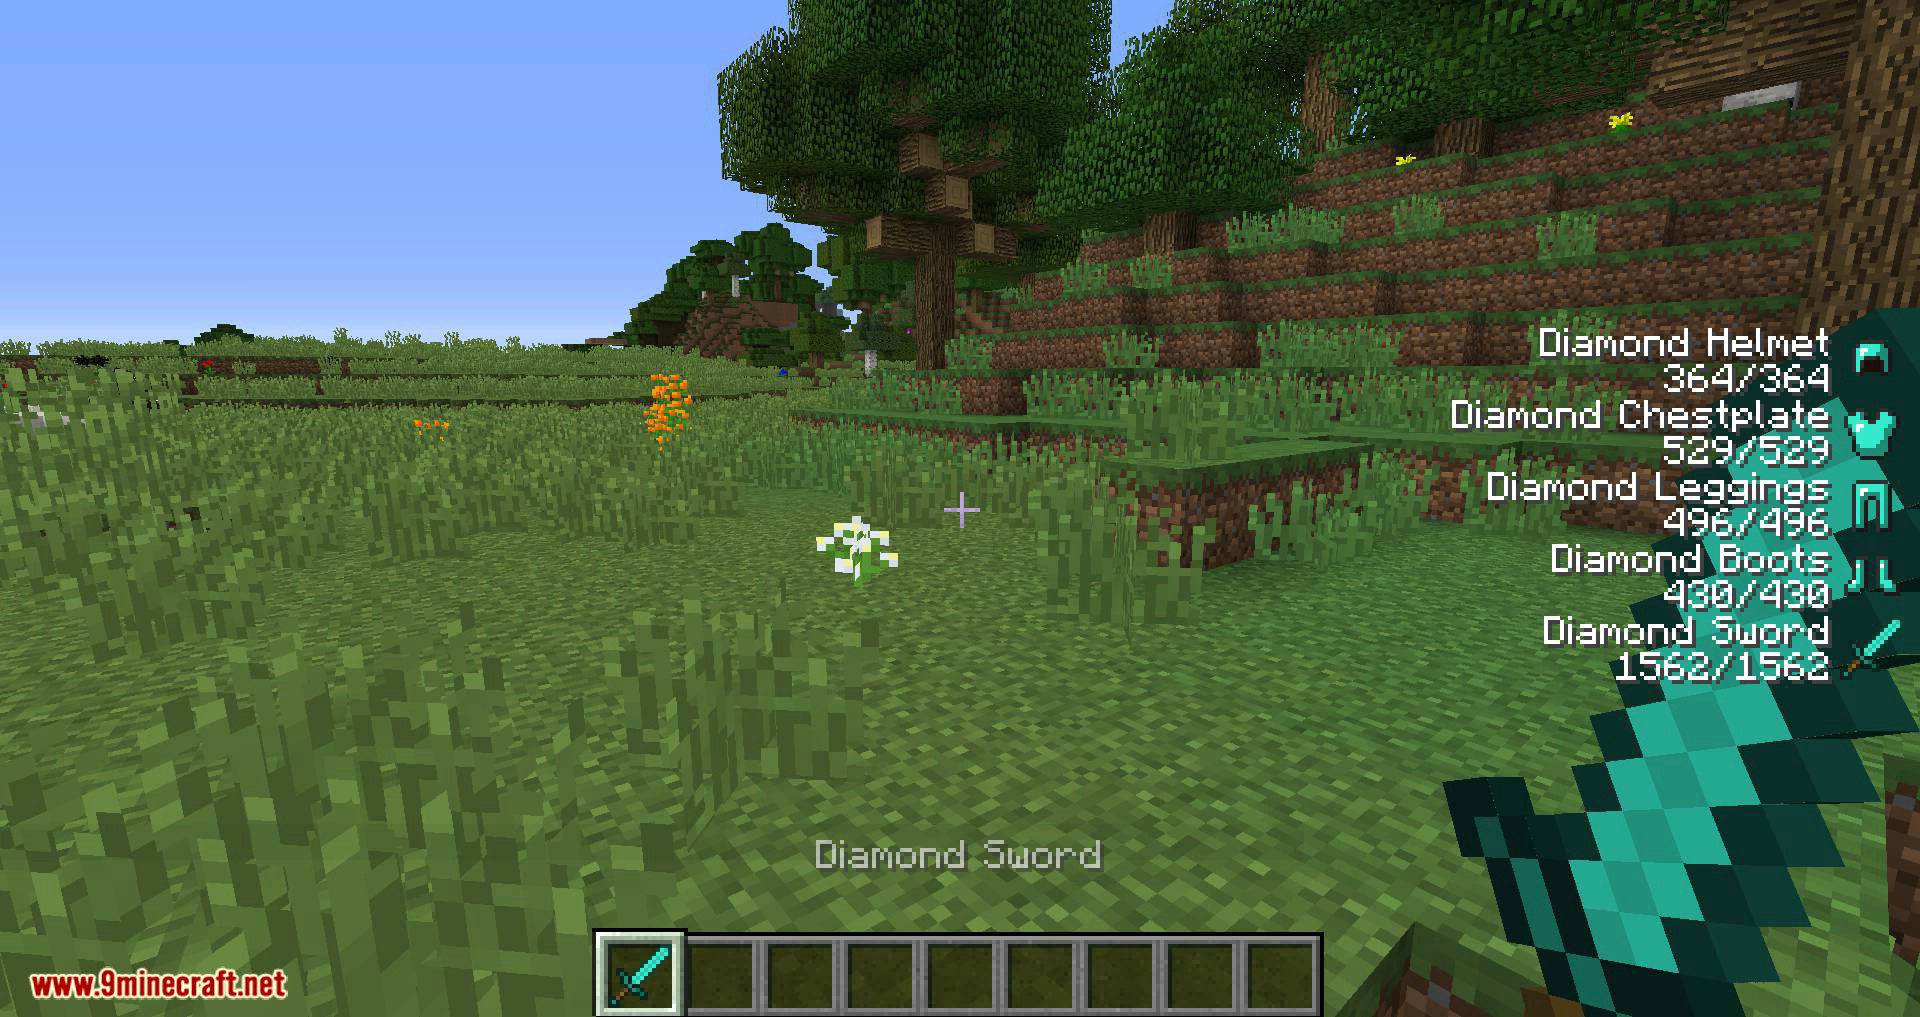 Armorstatushud Updated Mod 1 12 2 1 10 2 Provides A Hud With Your Equipped Armor Items Stats 9minecraft Net